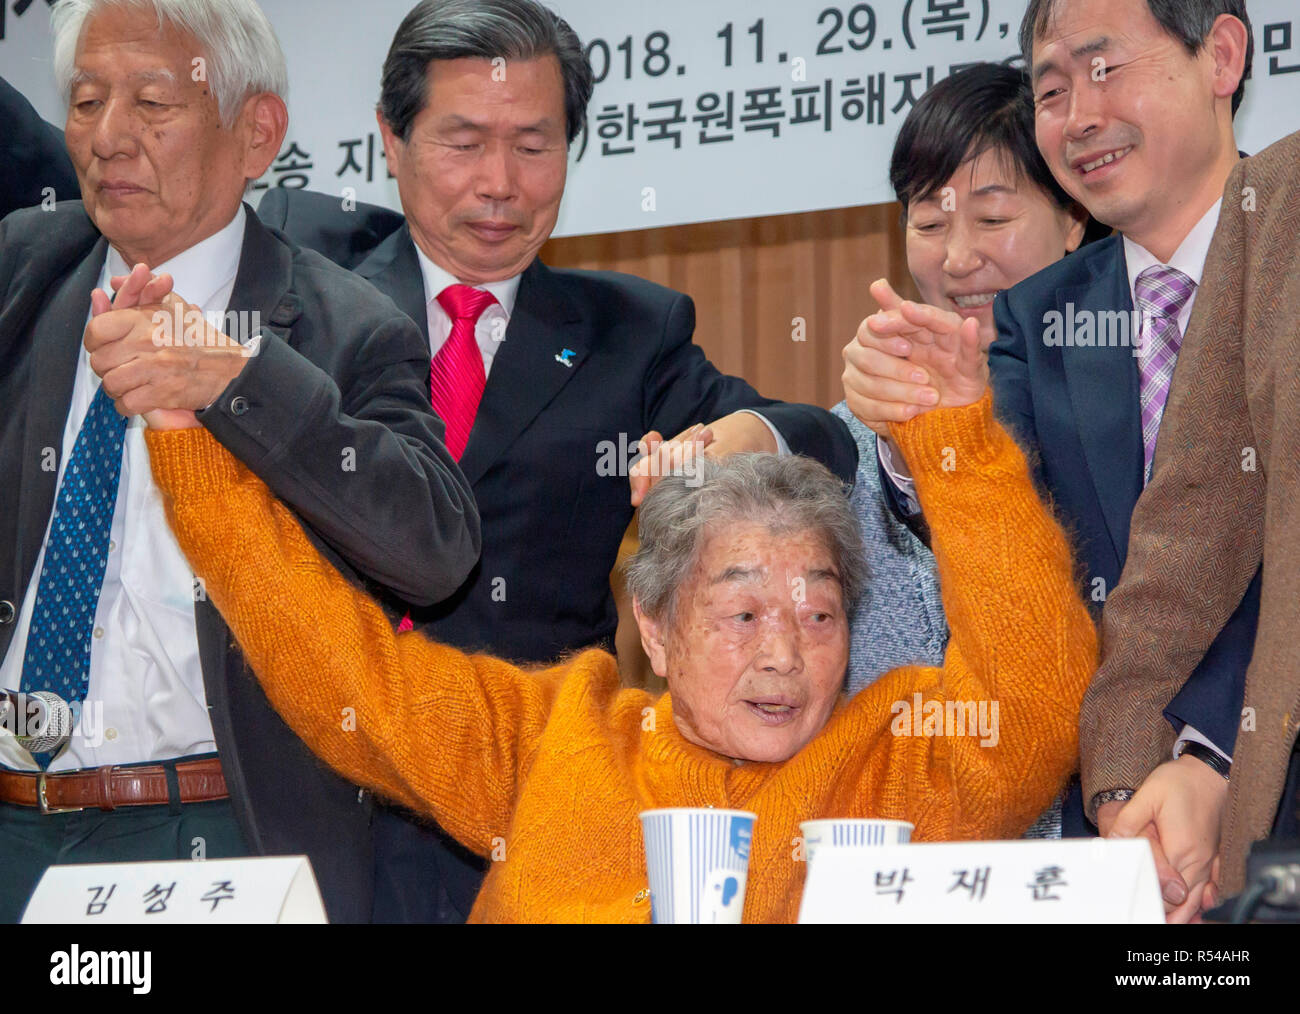 Kim Sung-Joo and Makoto Takahashi, Nov 29, 2018 : Kim Sung-Joo (C), a victim of Japan's forced labor during World War II and Japanese lawyer Makoto Takahashi (L) celebrate with South Korean lawyers during a press conference at the Seoul Bar Association near the Supreme Court in Seoul, South Korea after the Supreme Court's ruling on damages suits. According to local media, South Korea's Supreme Court ordered Mitsubishi Heavy Industries to compensate 10 Koreans who worked at its shipyard and other production facilities in Hiroshima and Nagoya in 1944 with no pay and a bereaved family member of a Stock Photo